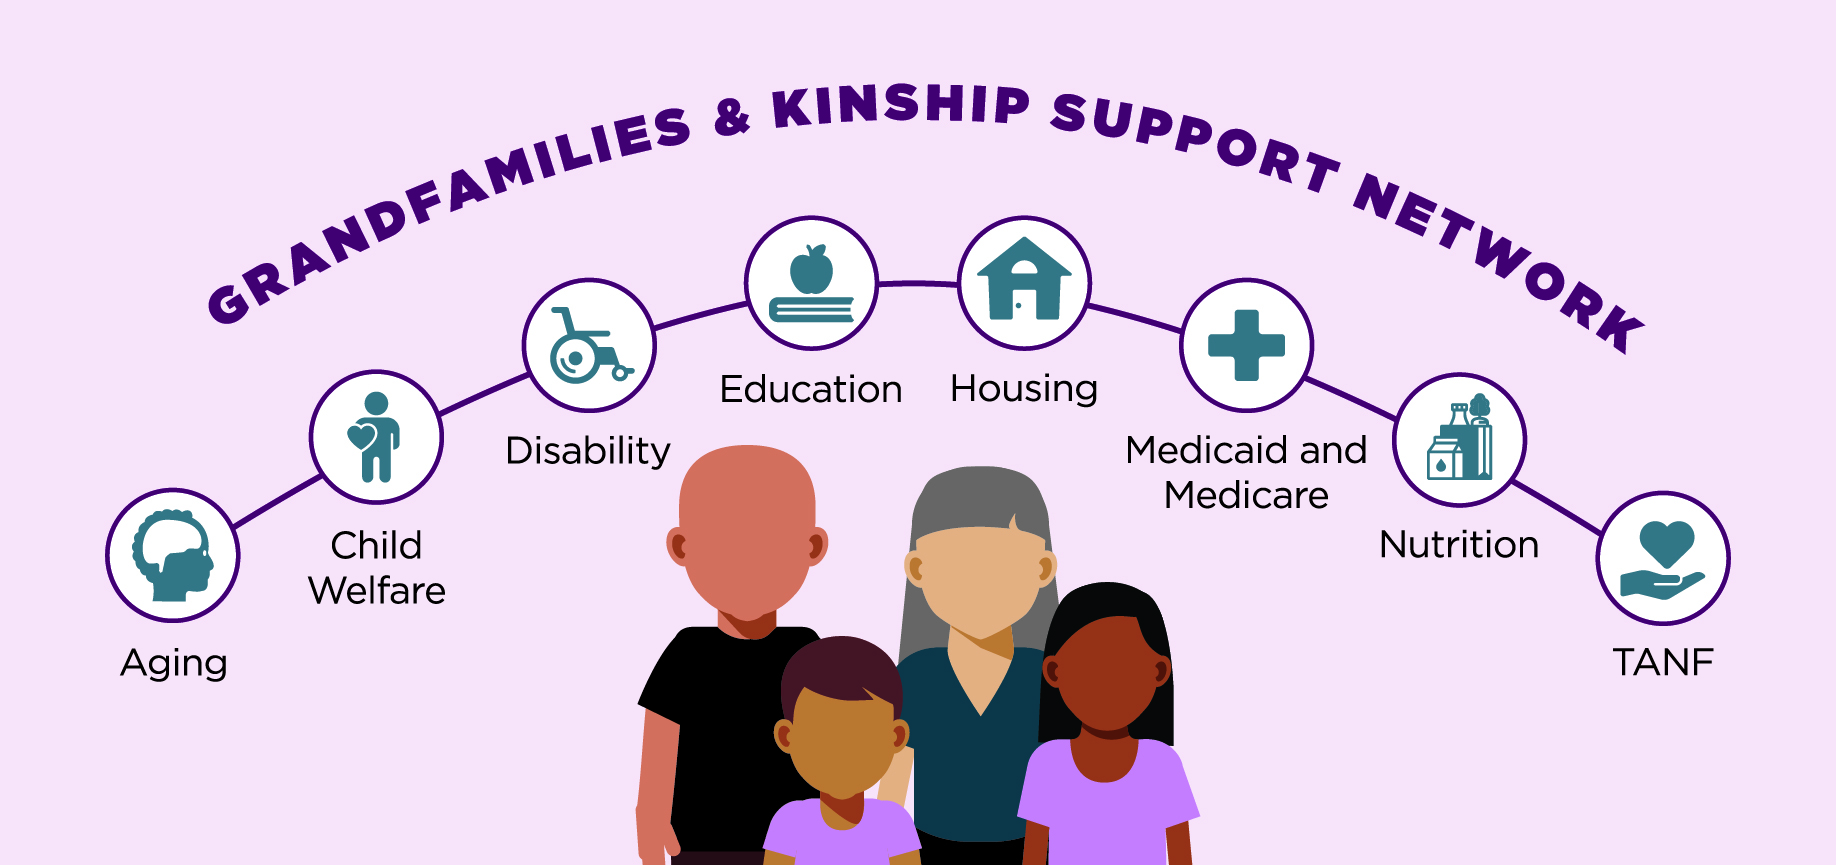 A graphic showing a diverse kin/grandfamily, with labeled icons representing the systems of aging, child welfare, disability, education, housing, Medicaid/Medicare, nutrition, and TANF connected by a line and forming an umbrella over the family; above the icons, the words "GRANDFAMILIES & KINSHIP SUPPORT NETWORK" appear and follow the umbrella shape